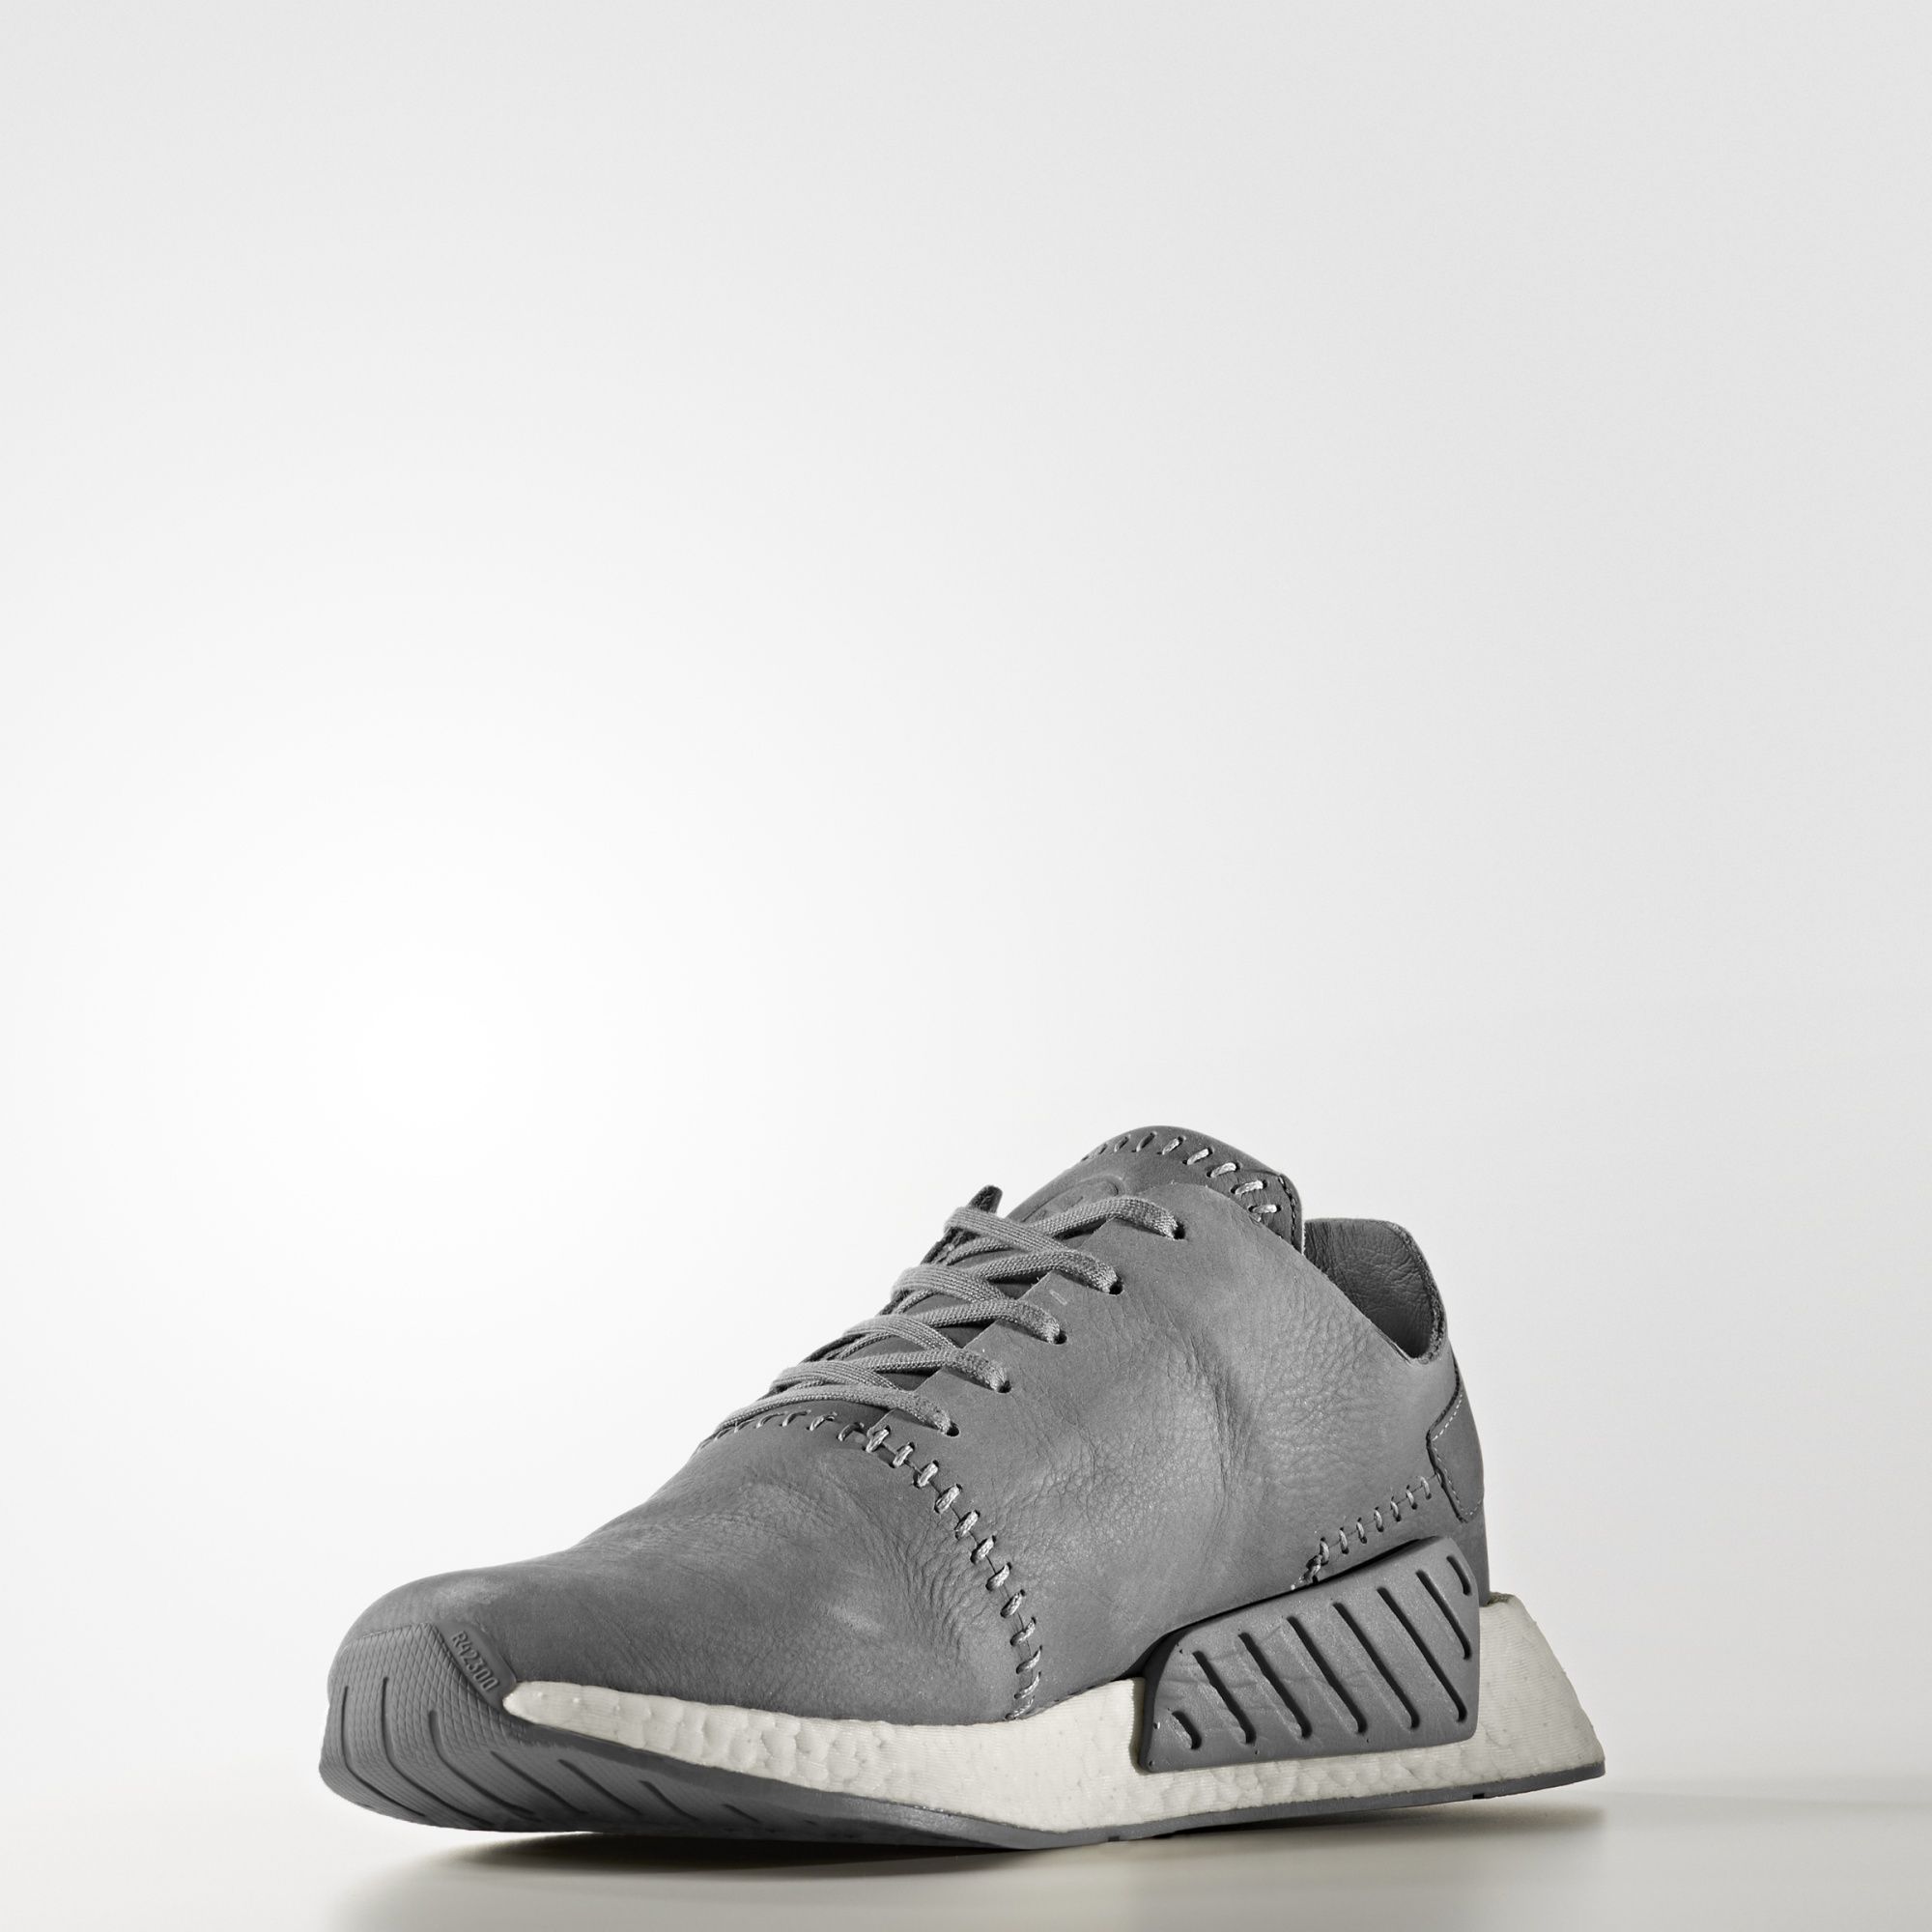 Adidas Originals by Wings + Horns 
NMD_R2 Boost
Dark Grey / Off-White